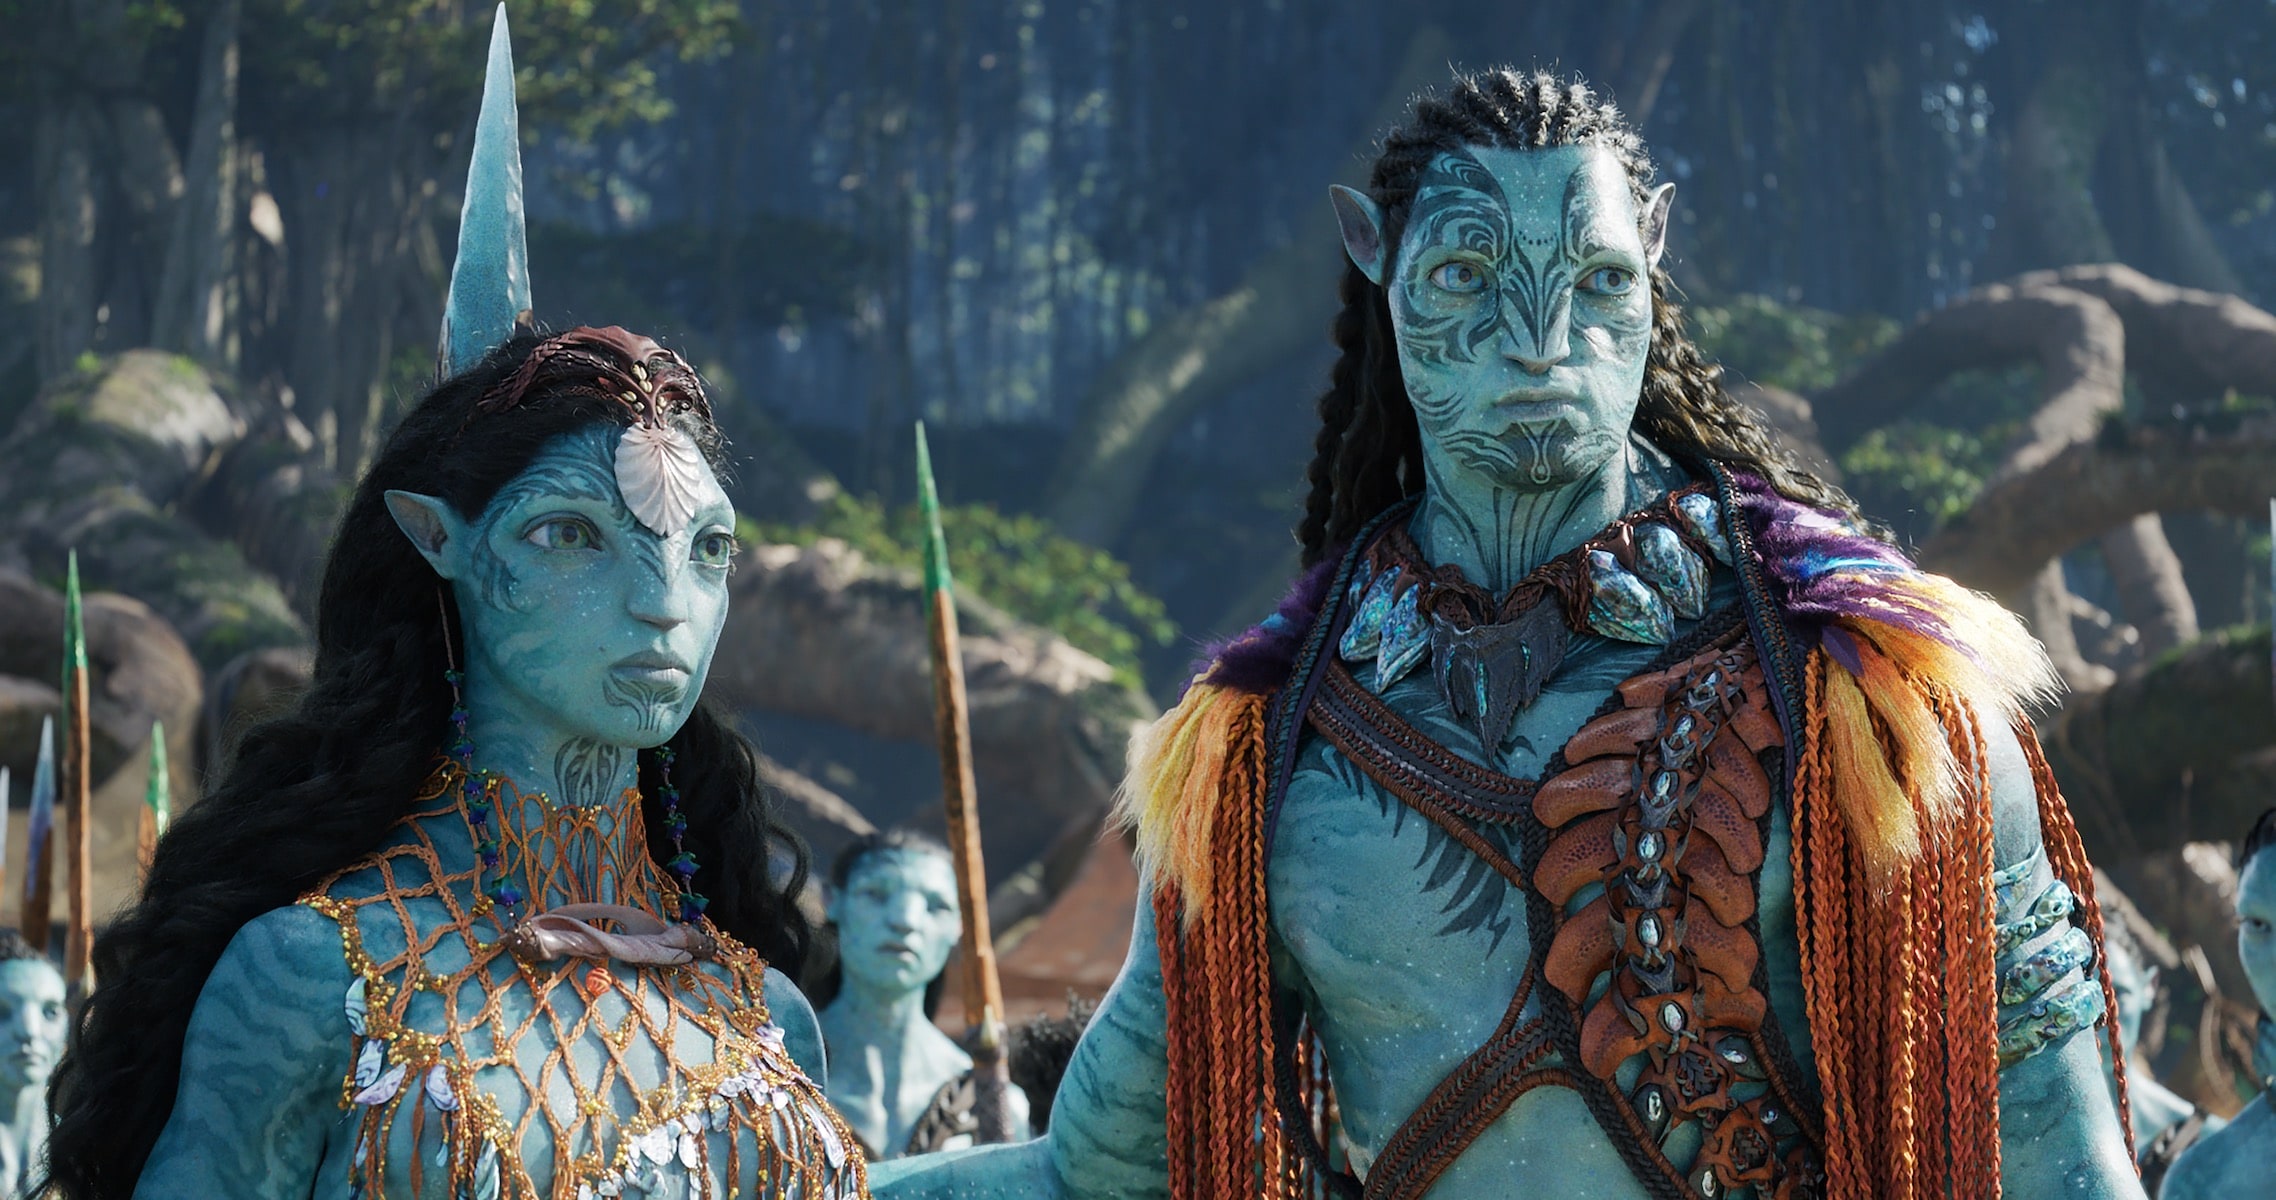 avatar 2 review movie way water kate winslet avatar 2 movie review the way of water